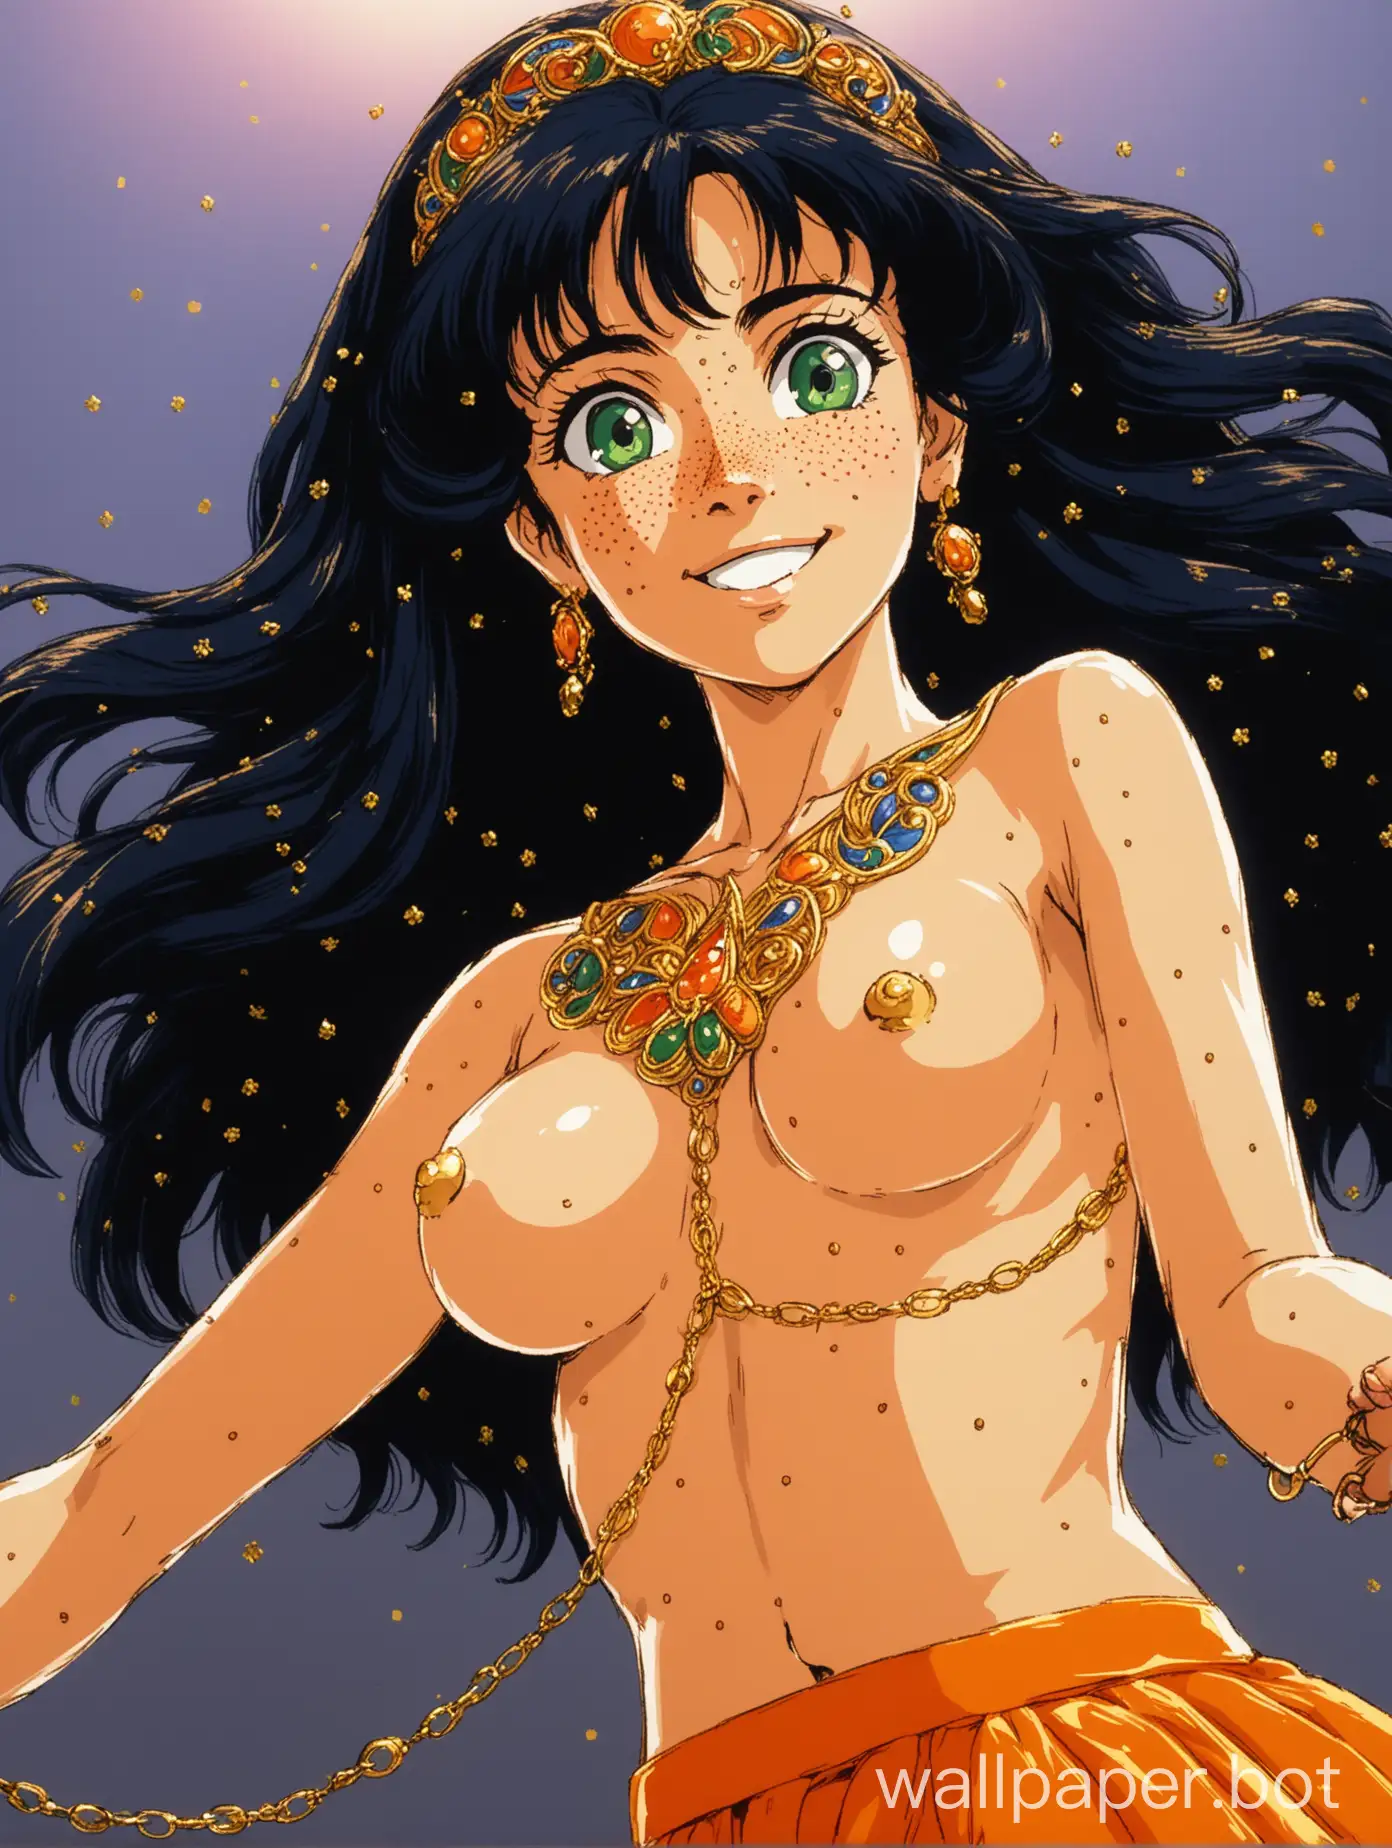 Elegant-Topless-Syrian-Woman-Dancing-Portrait-of-a-Pretty-Freckled-Lady-in-Retro-Anime-Style